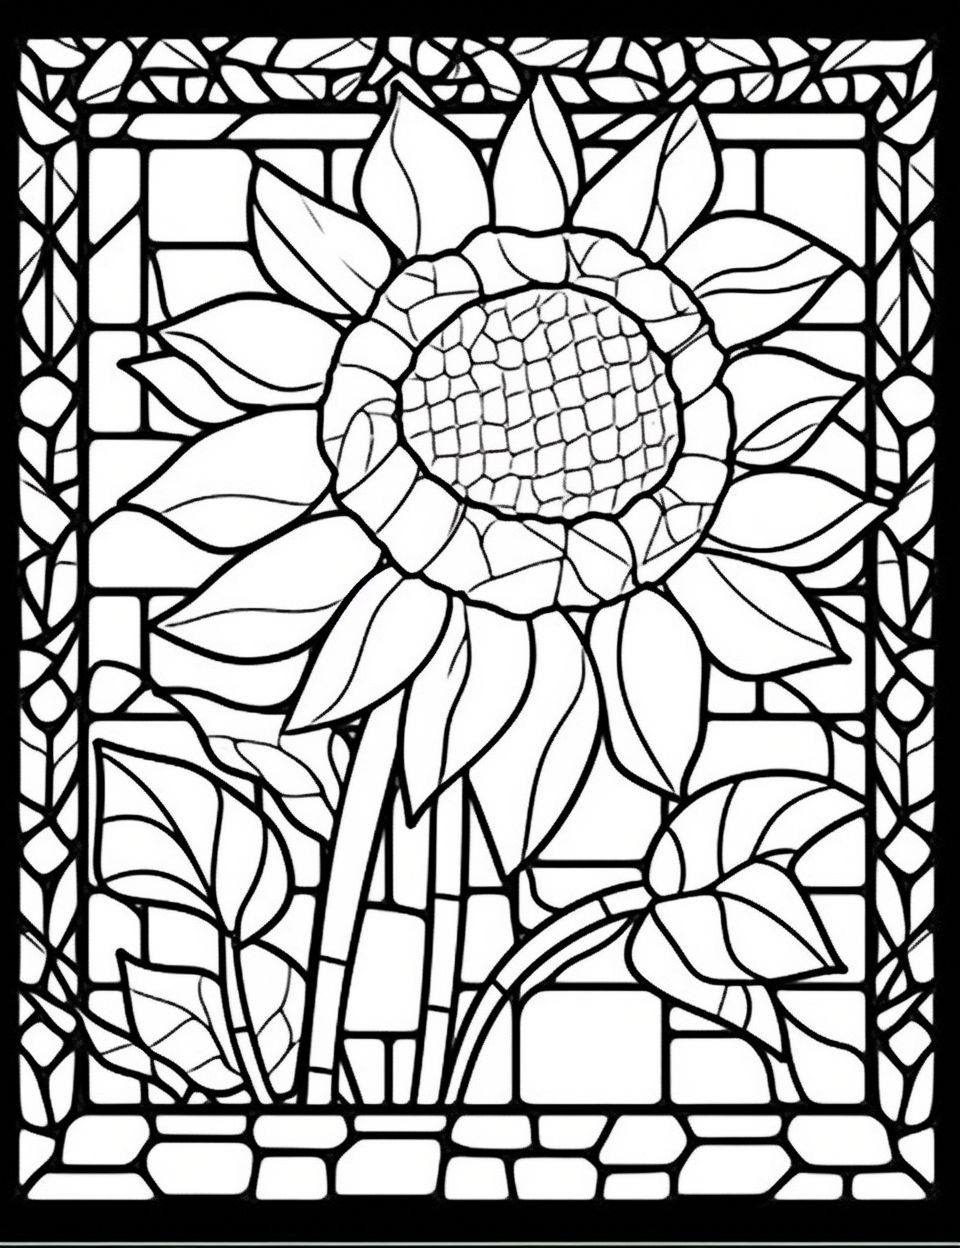 Florals coloring page free mosaic style in coloring pages cool coloring pages coloring pages to print